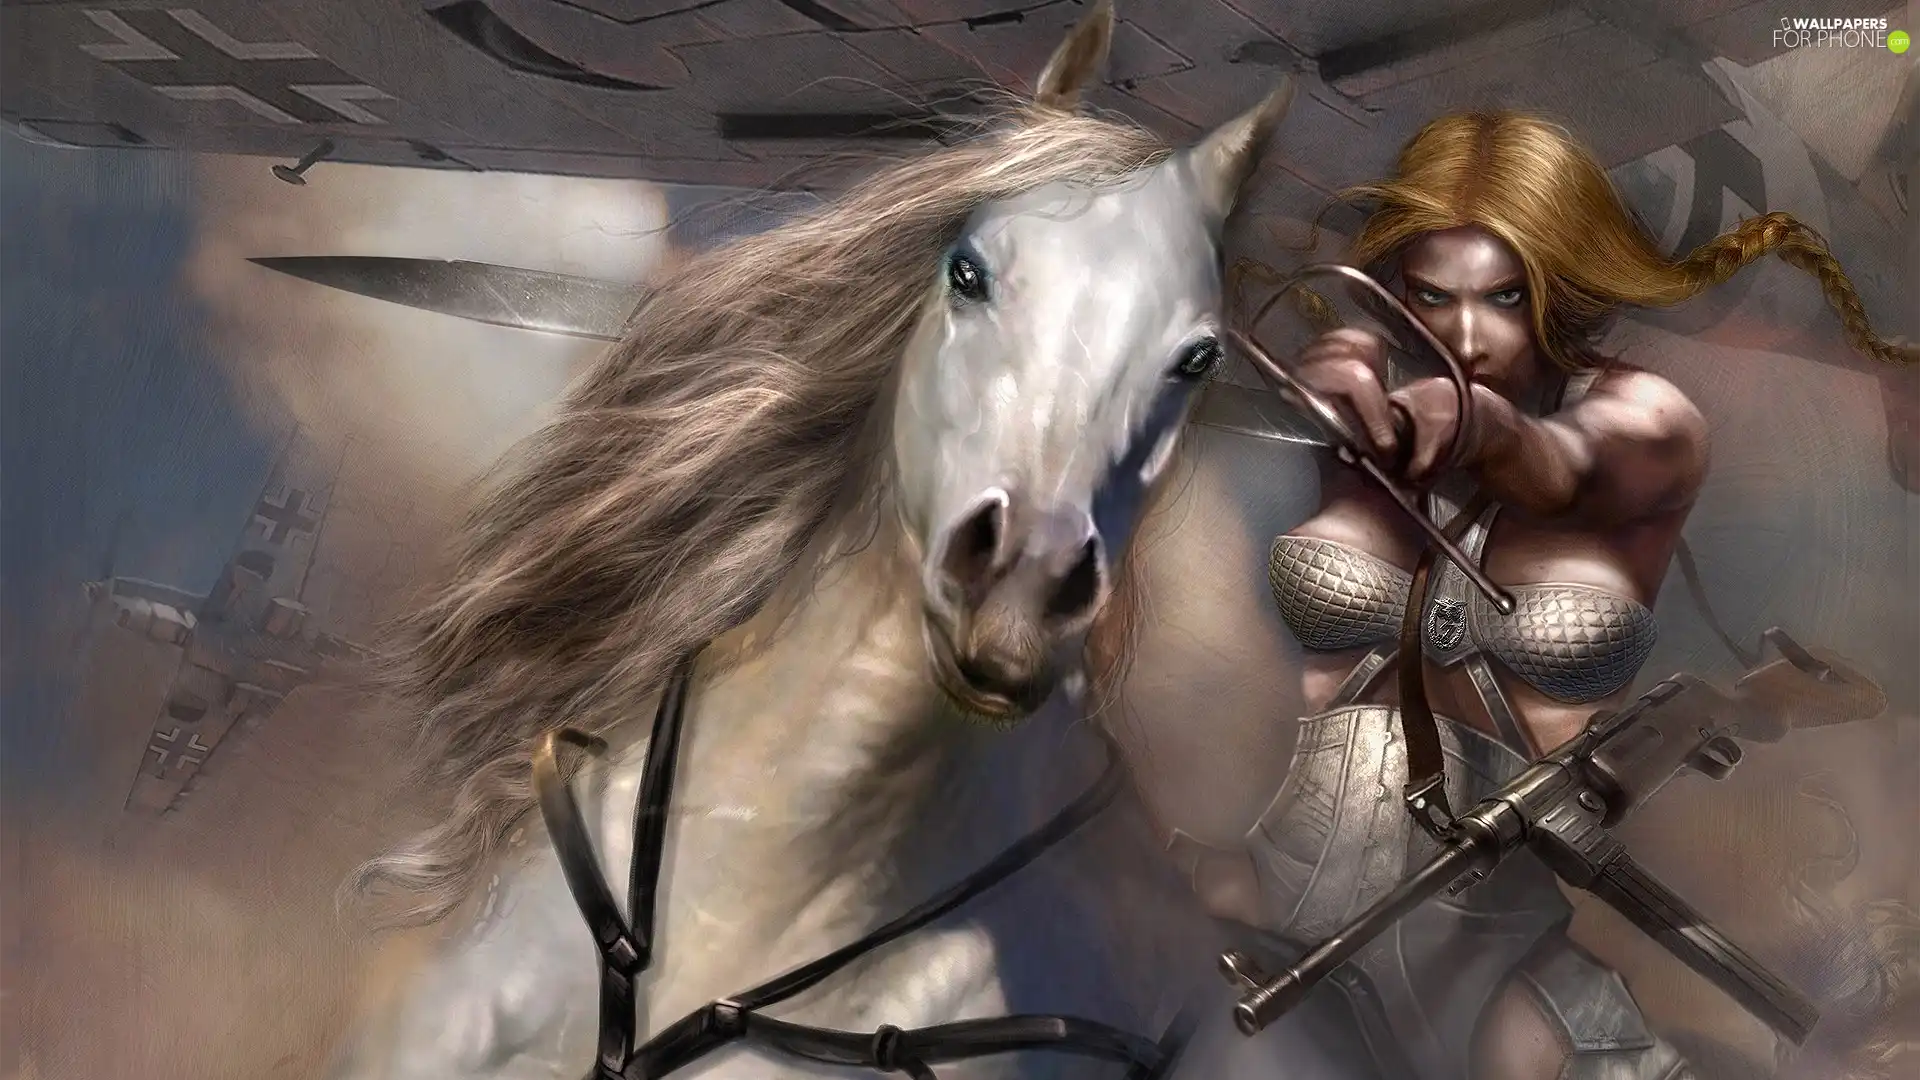 girl, Weapons, Horse, Armor